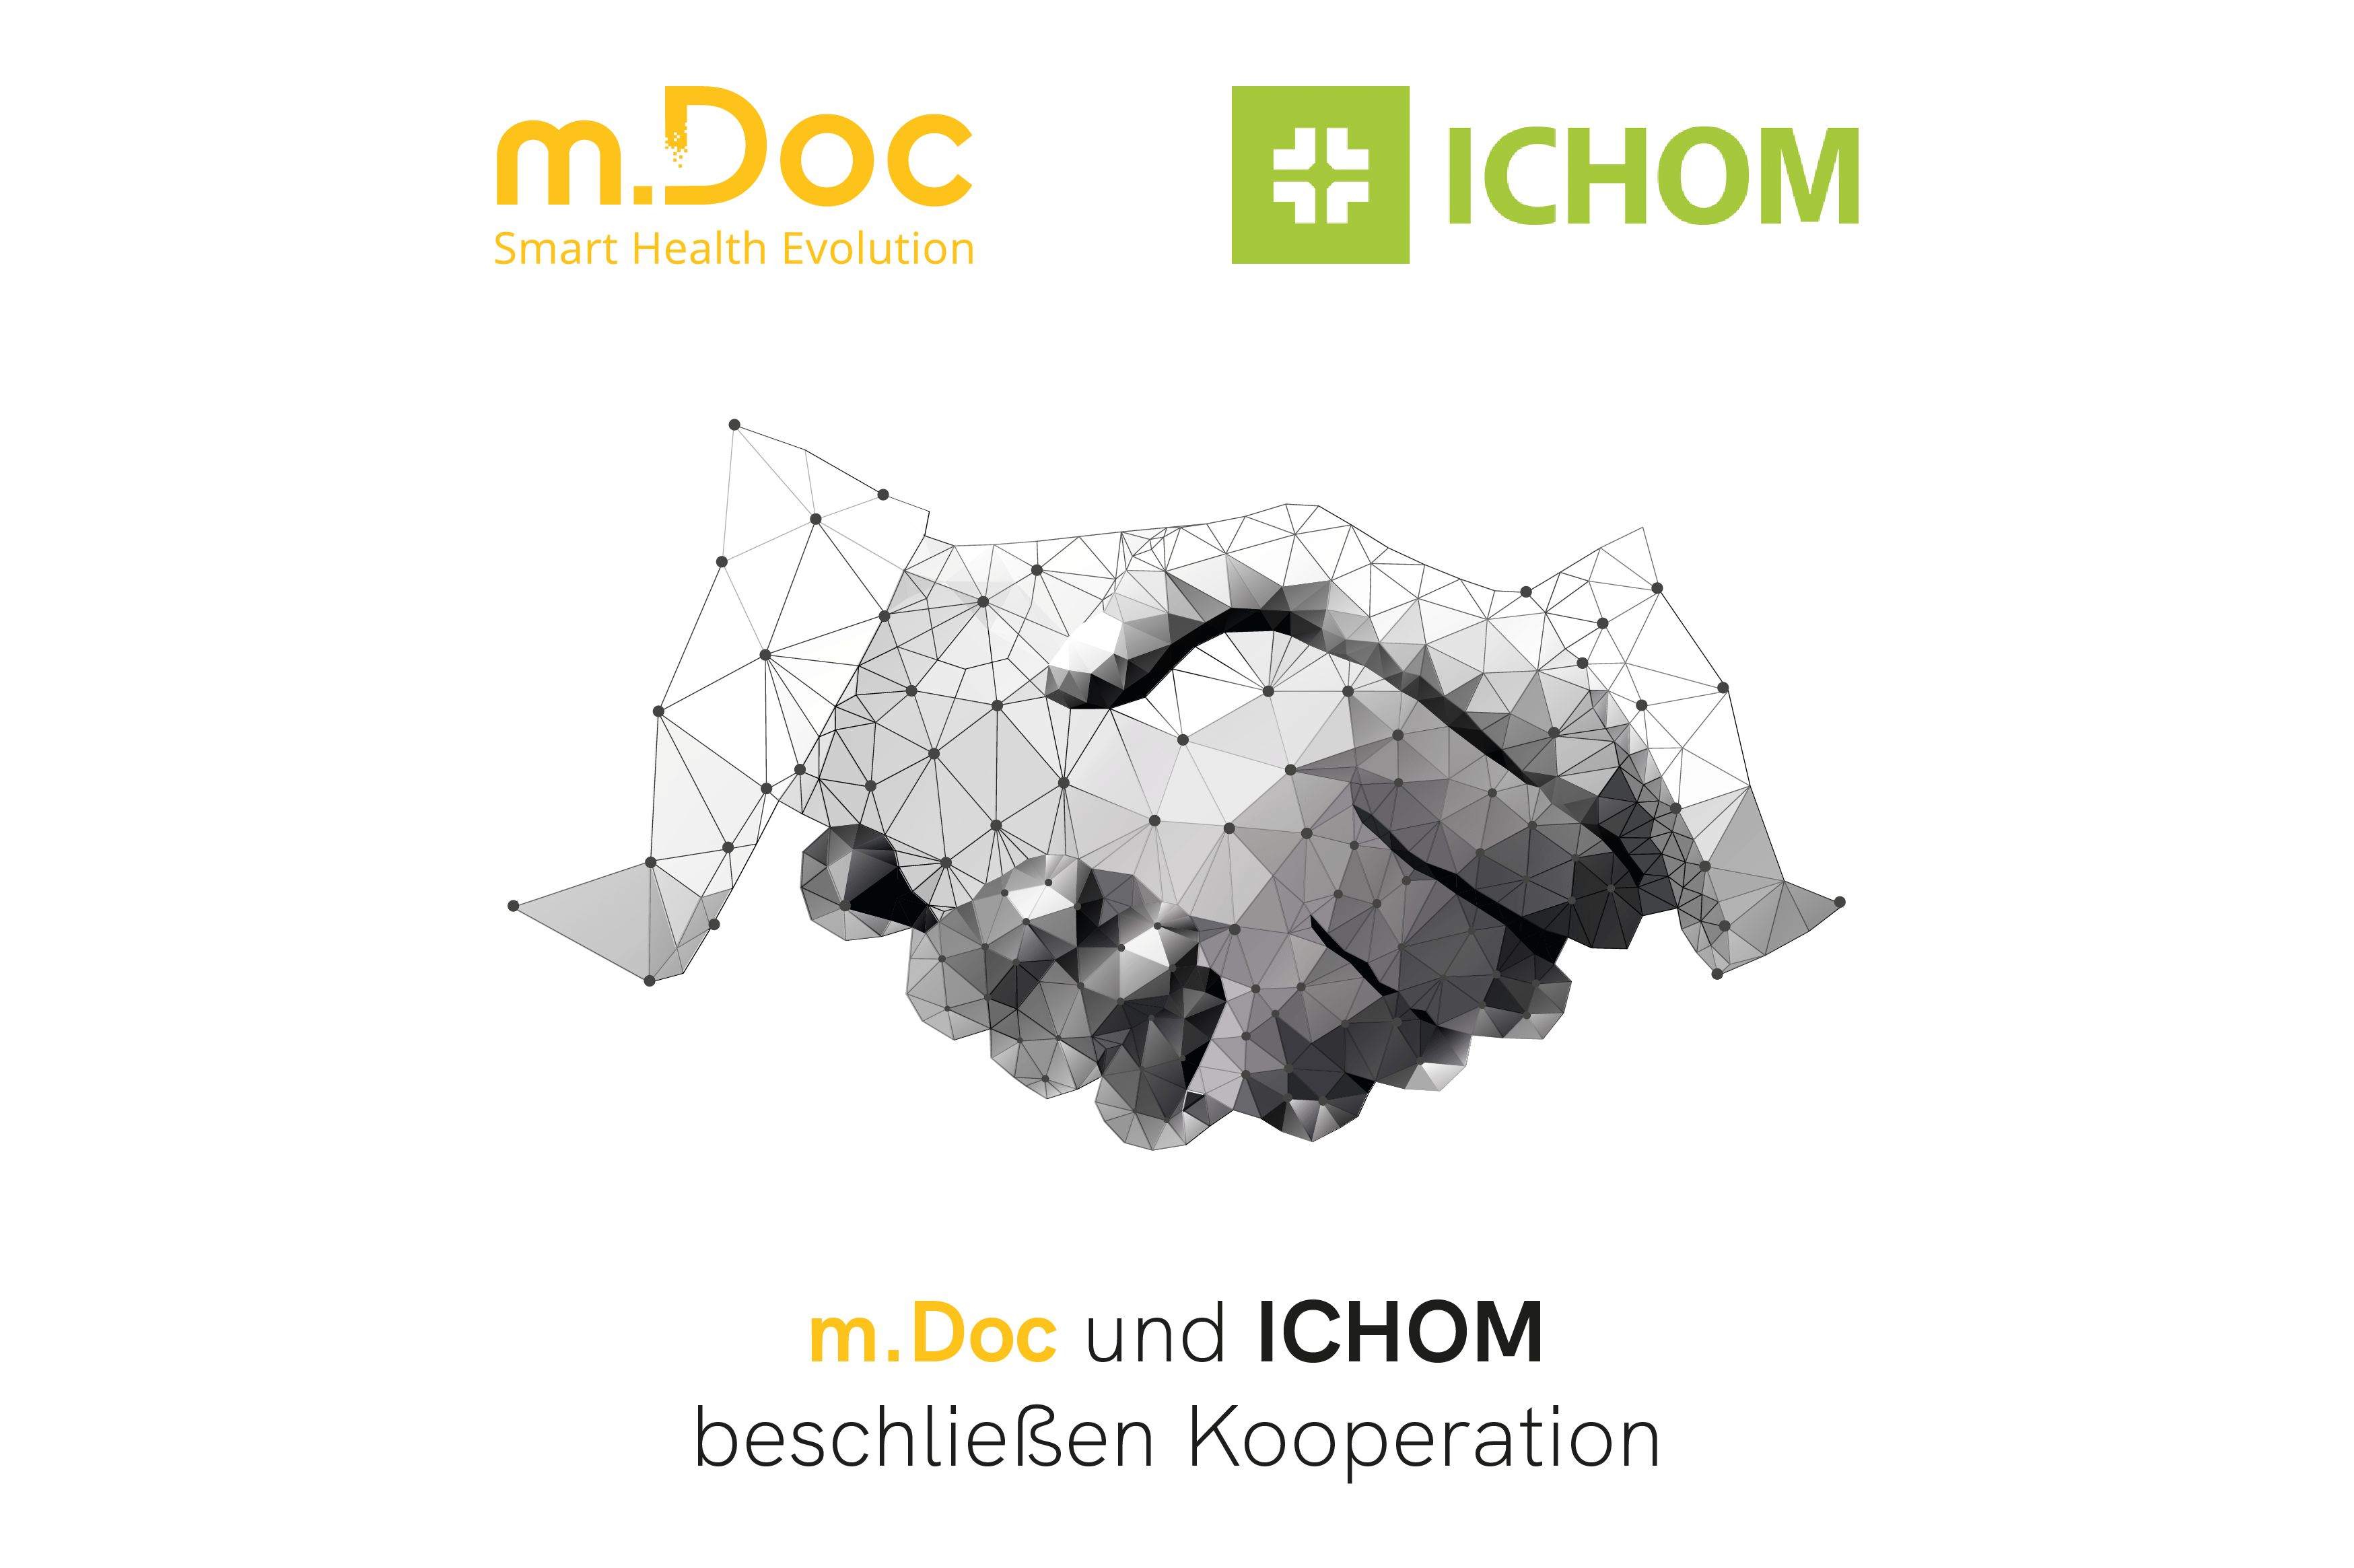 Read more about the article m.Doc and ICHOM agree on cooperation